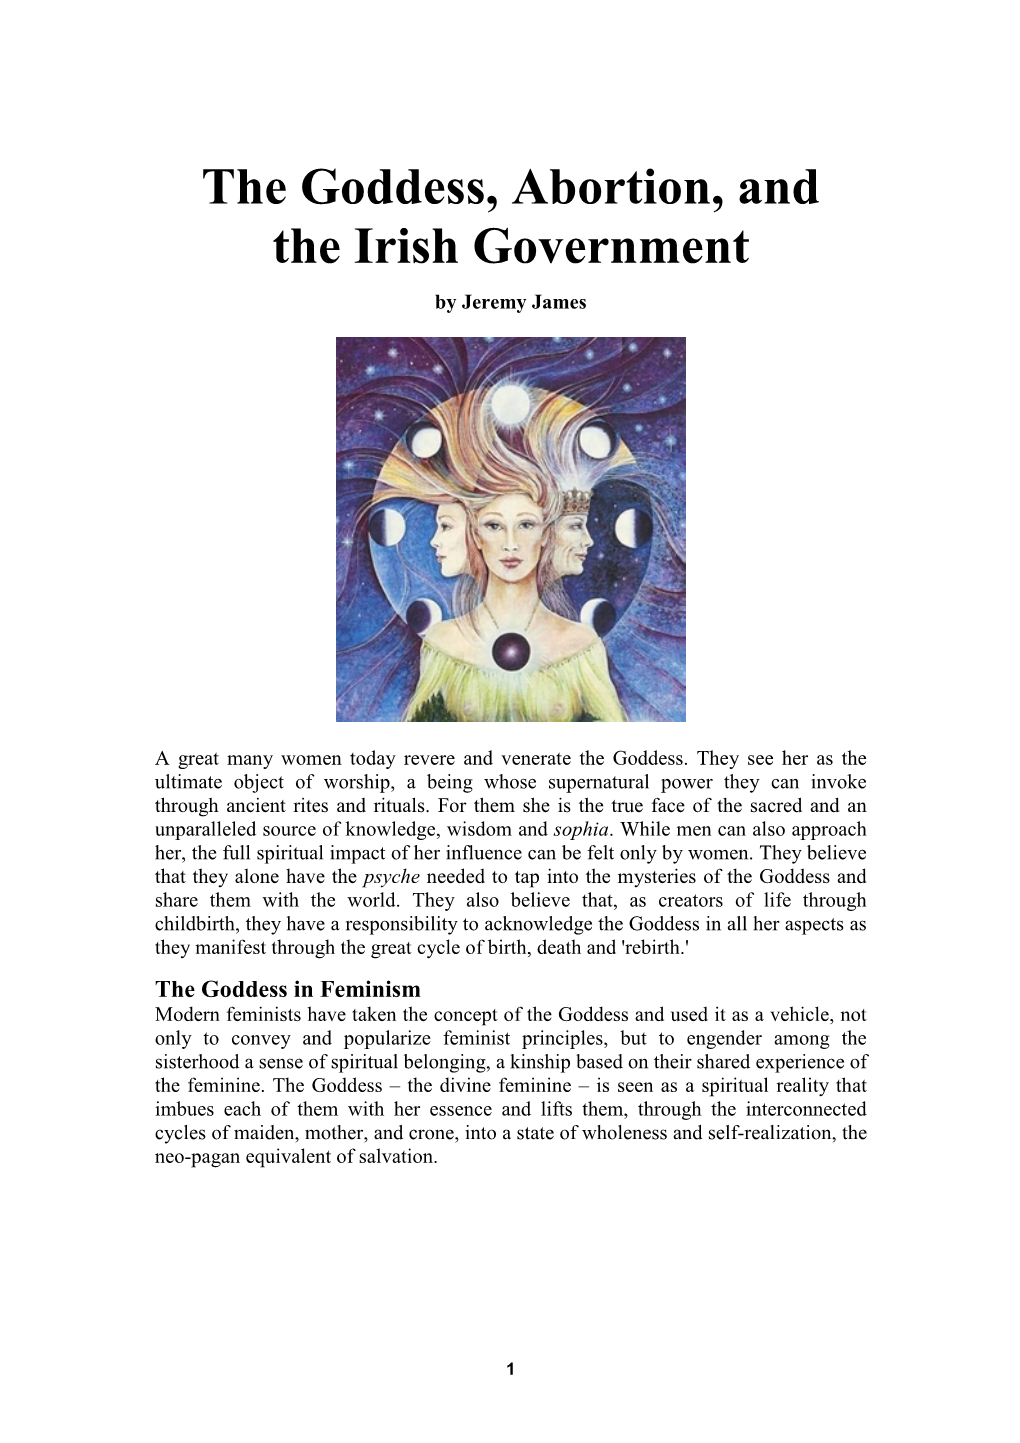 The Goddess, Abortion, and the Irish Government